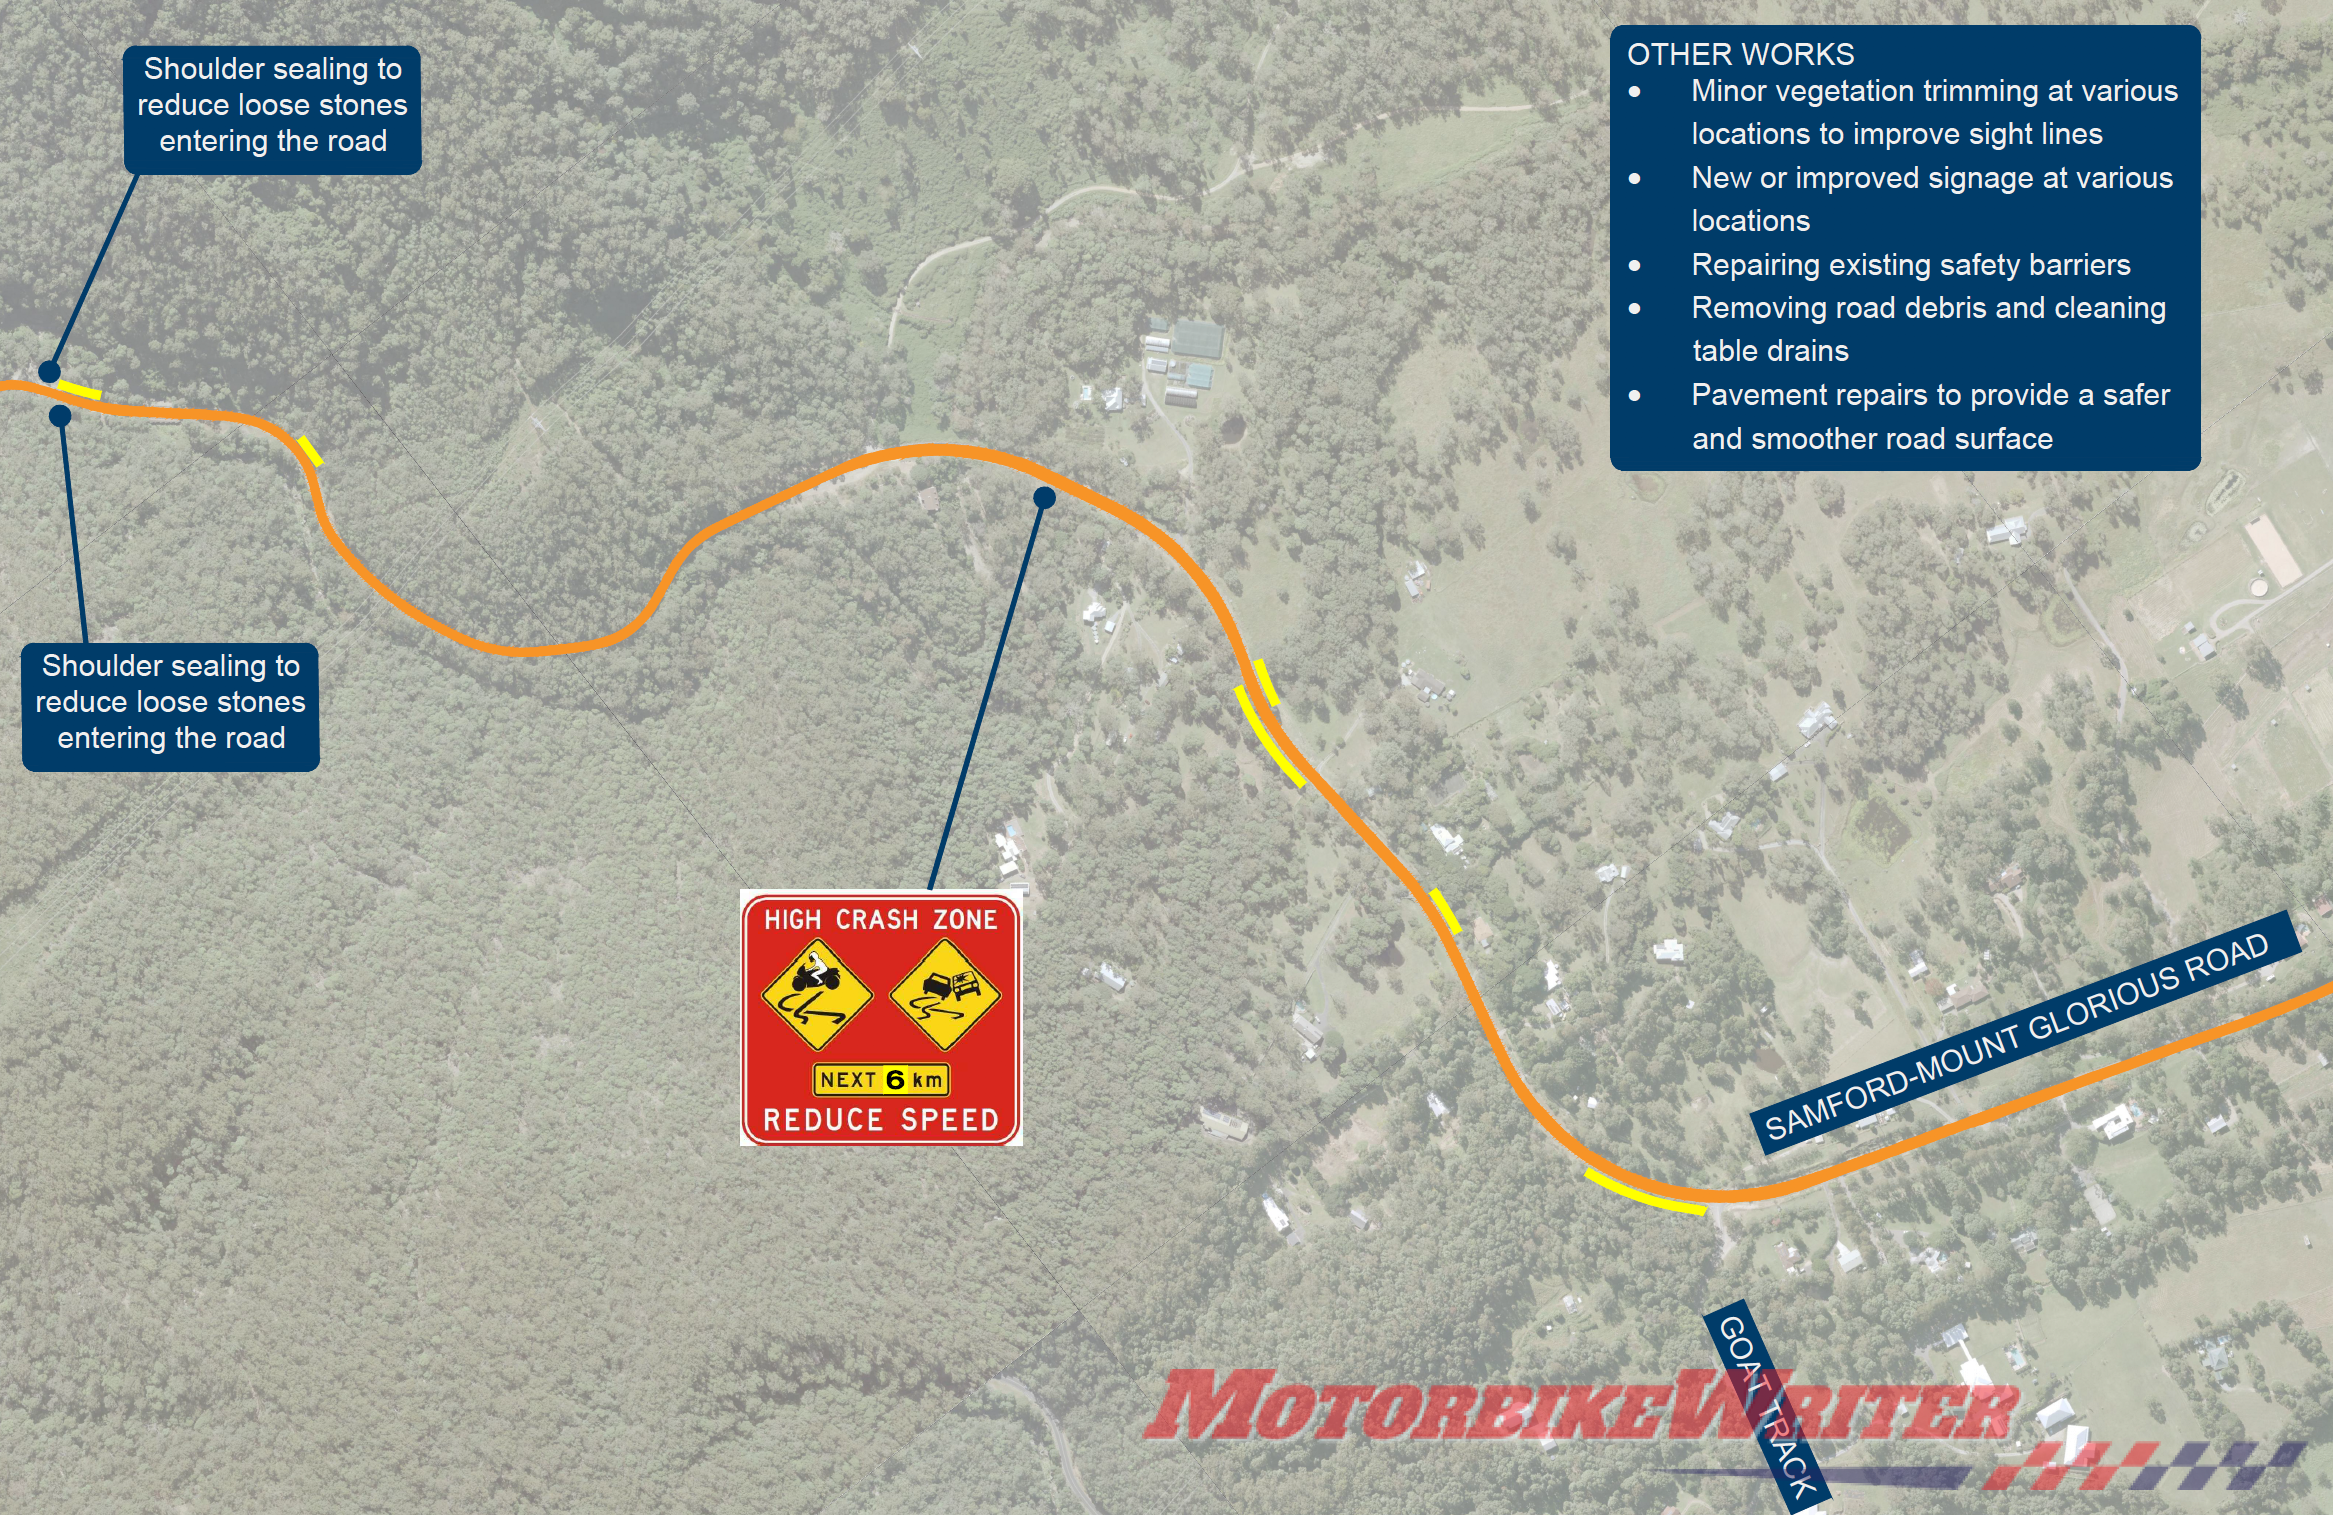 Roadworks proposed for Mt Glorious Road